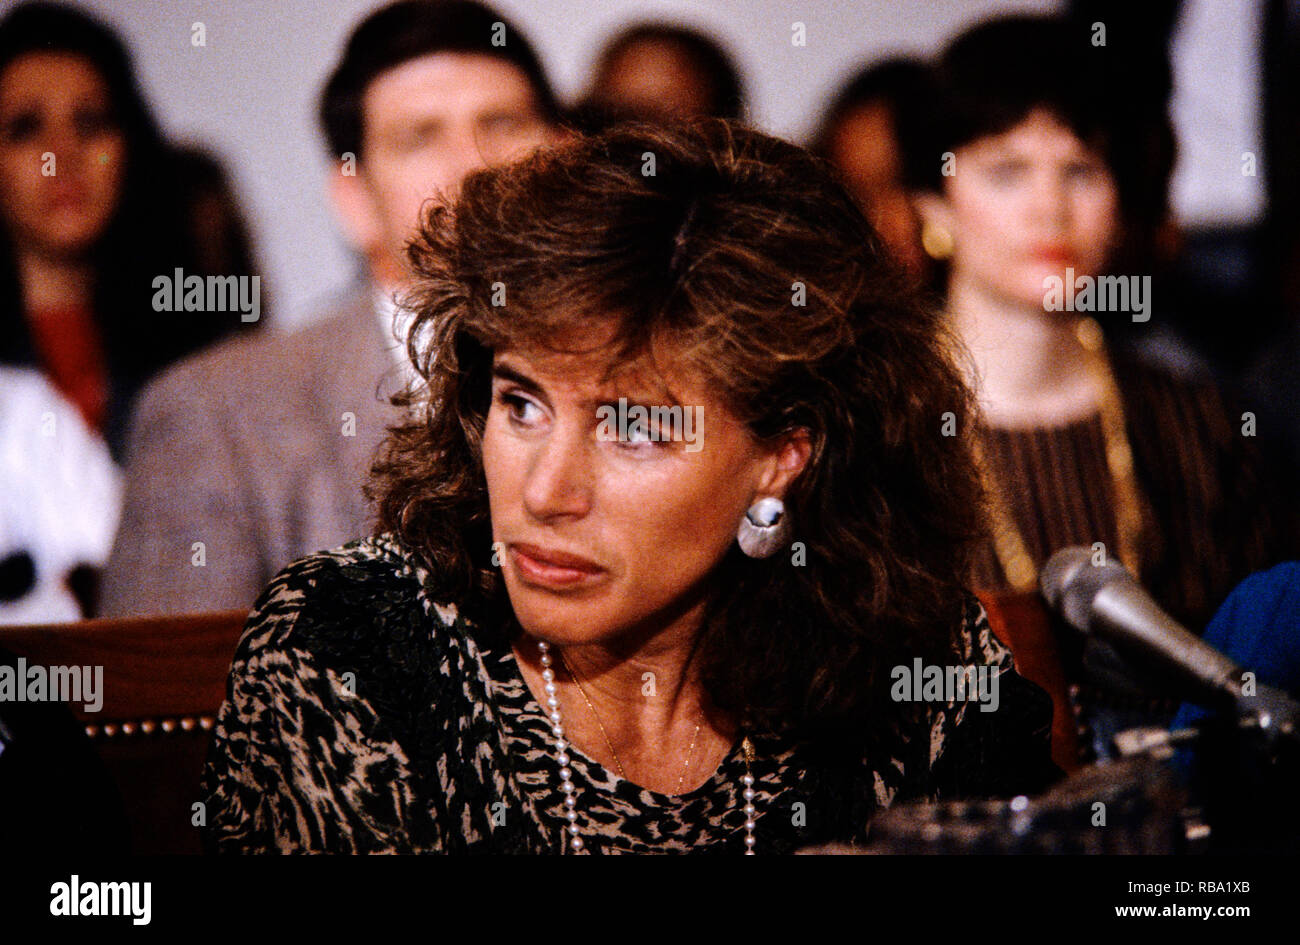 Elizabeth Glaser, wife of actor and director Paul Michael Glaser, testifies during a pediatric AIDS hearing before the United States House Budget Committee's Task Force on Human Resources on Capitol Hill in Washington, DC, March 13, 1990. Elizabeth Glaser contracted the AIDS virus after receiving an HIV-contaminated blood transfusion in 1981 while giving birth, subsequently infecting both of her children. One of her children, daughter Ariel, died in 1988 of the disease.  Mrs. Glaser passed away from the disease on December 3, 1994.    Credit: Howard Sachs / CNP /MediaPunch Stock Photo